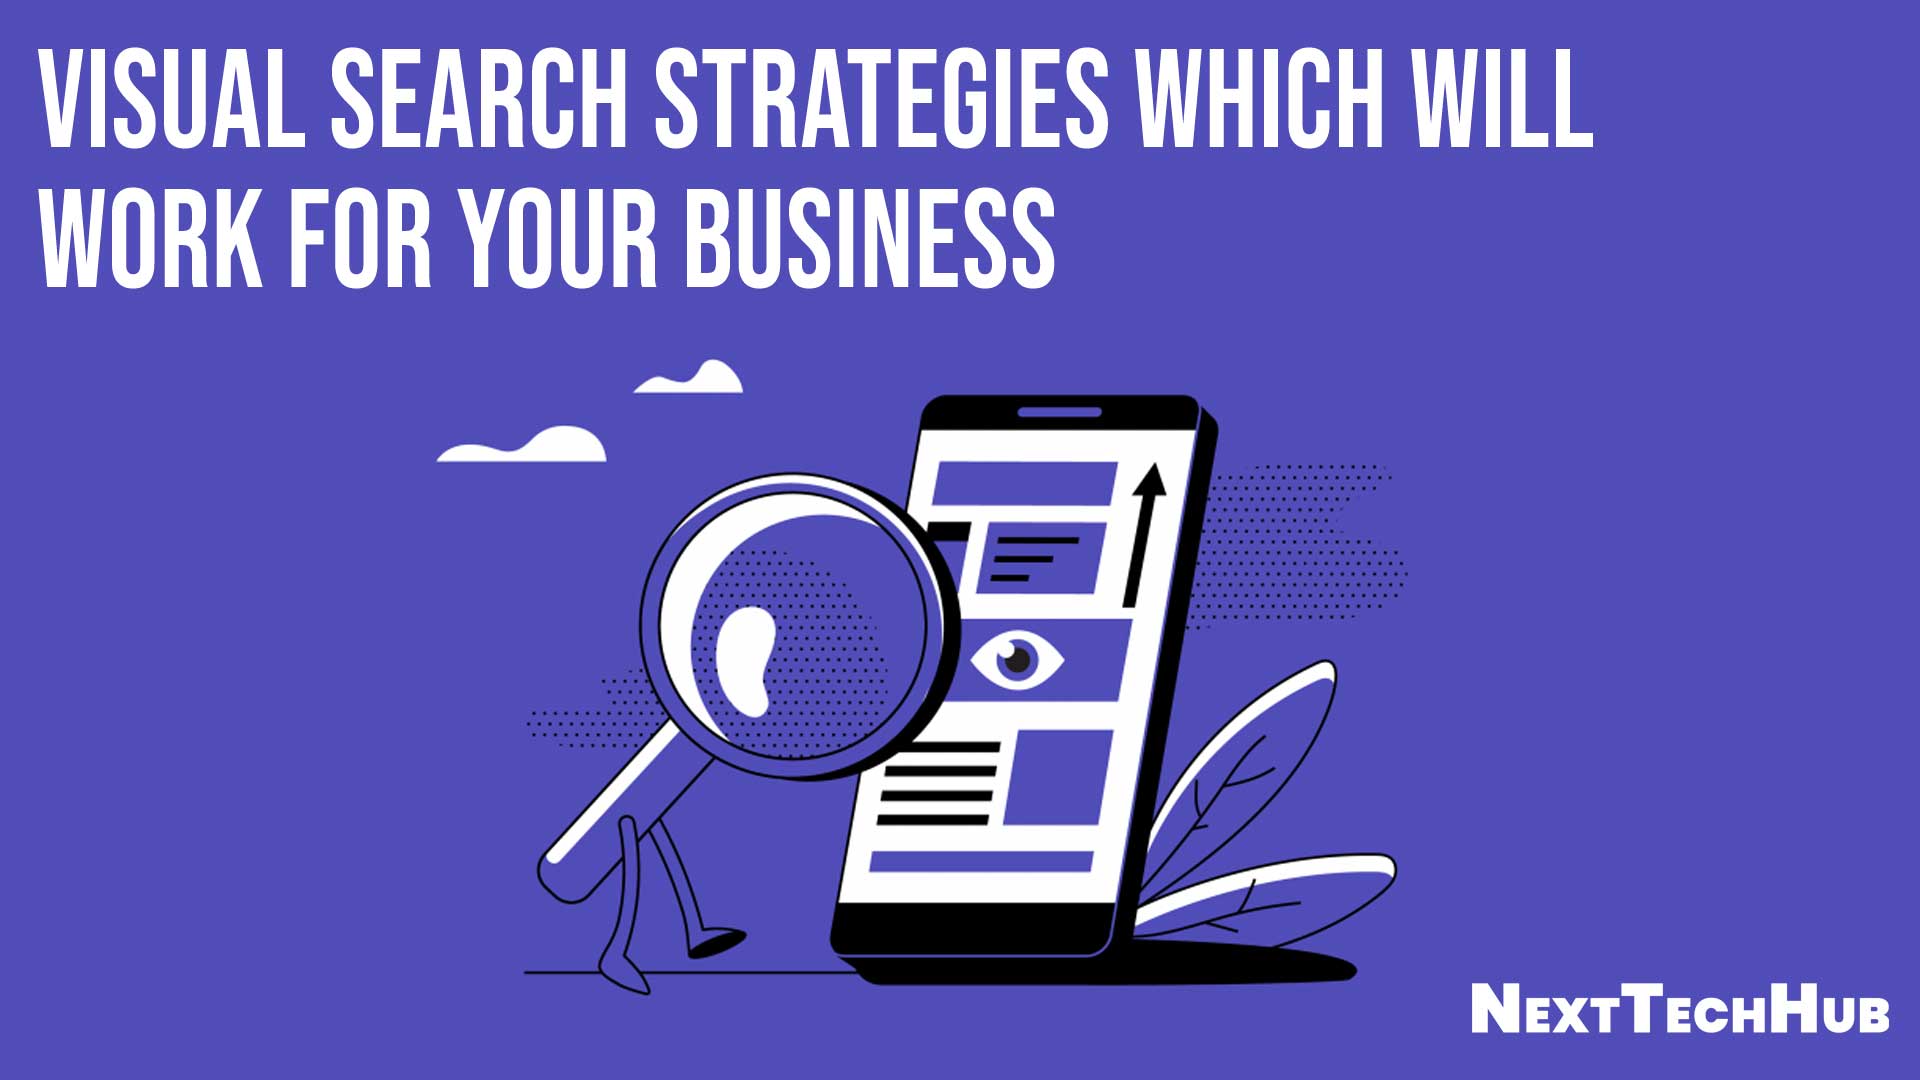 Visual Search Strategies which will Work for Your Business